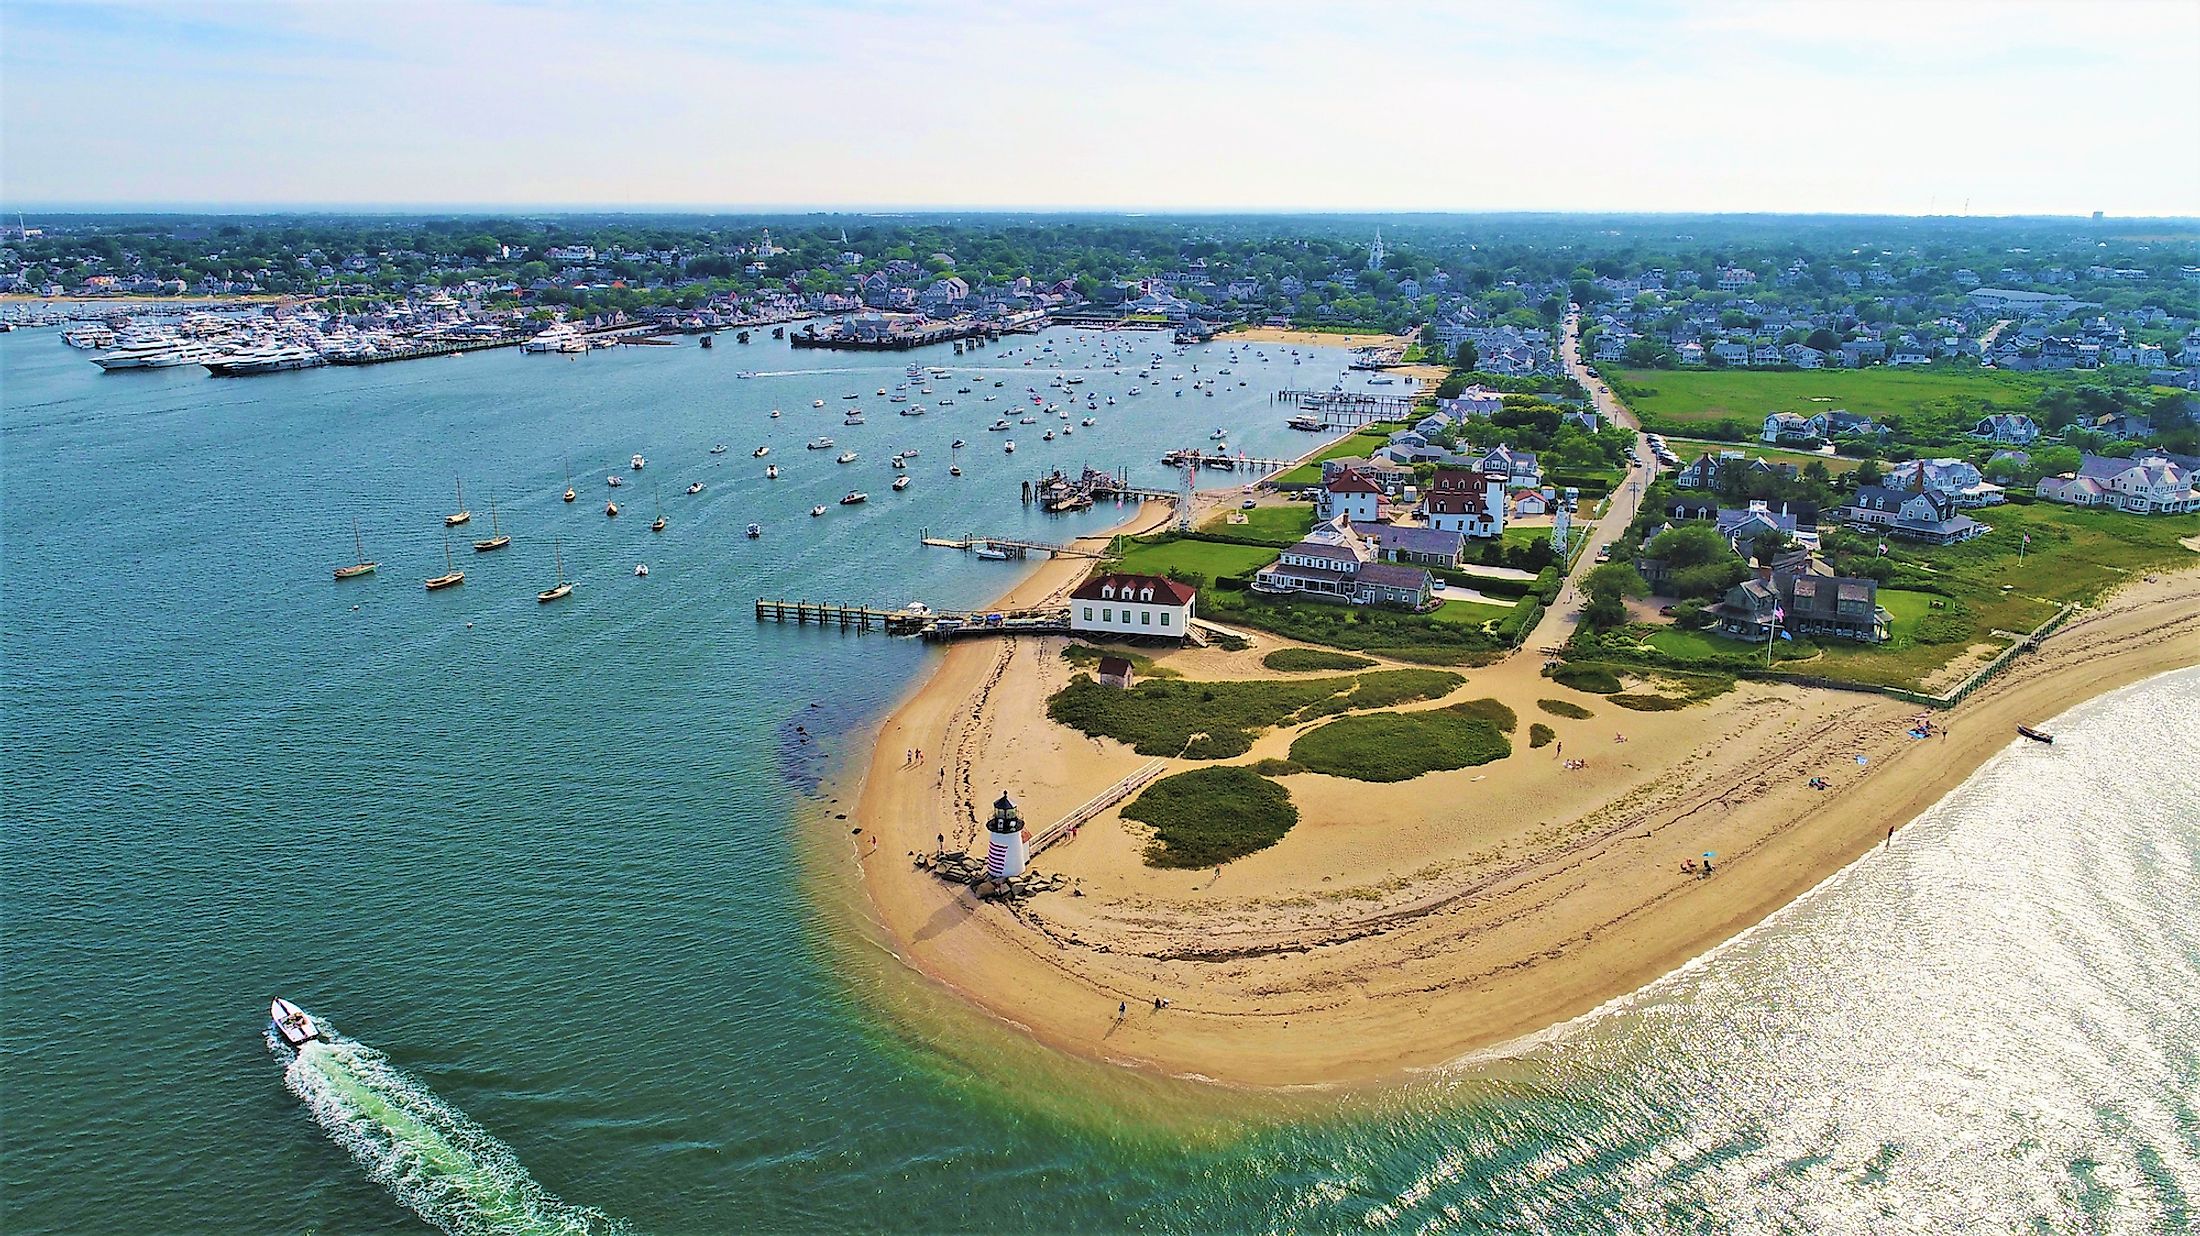 the entrance to Nantucket in Massachusetts